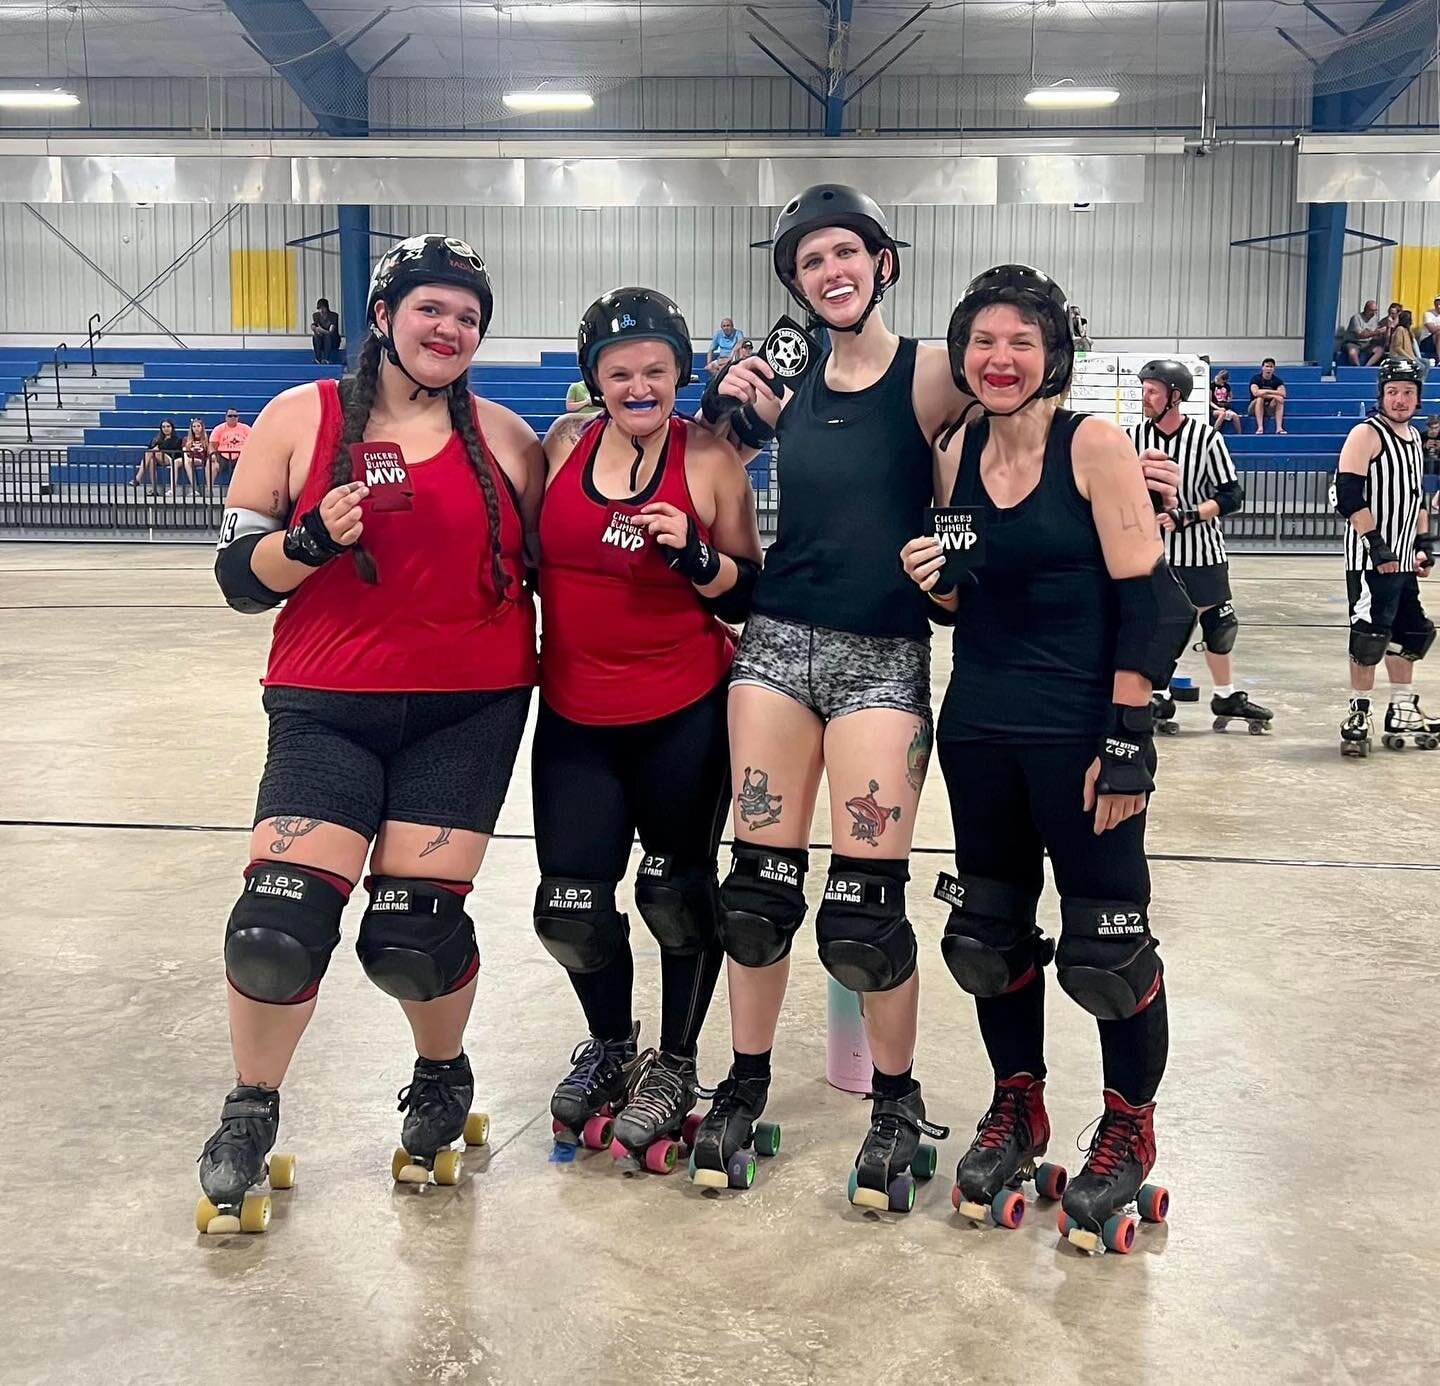 Thanks to all who helped out at the 2023 Cherry Rumble and congrats to our MVPs!
Game 1: Rookie Bout
Dez, Blazing Bulldog, Deacon and Molly
Game 2: Regulation Bout
Bio, Jawbreaker Jos&egrave;, Captain Beefstock, Catch Hell
Game 3: All-gender Bout
Hop